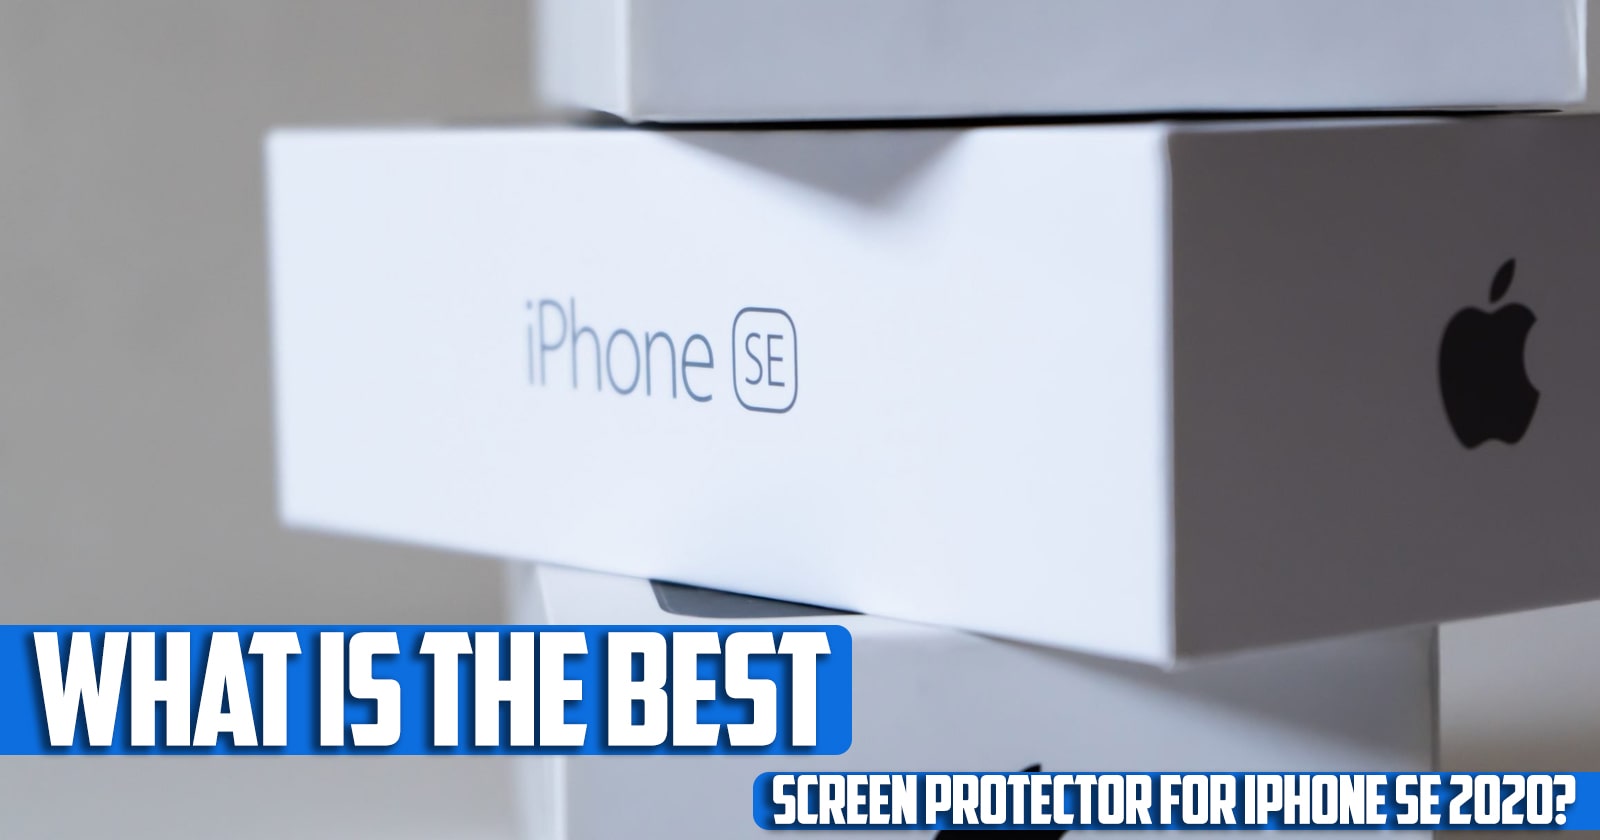 What is the best screen protector for iPhone SE 2020